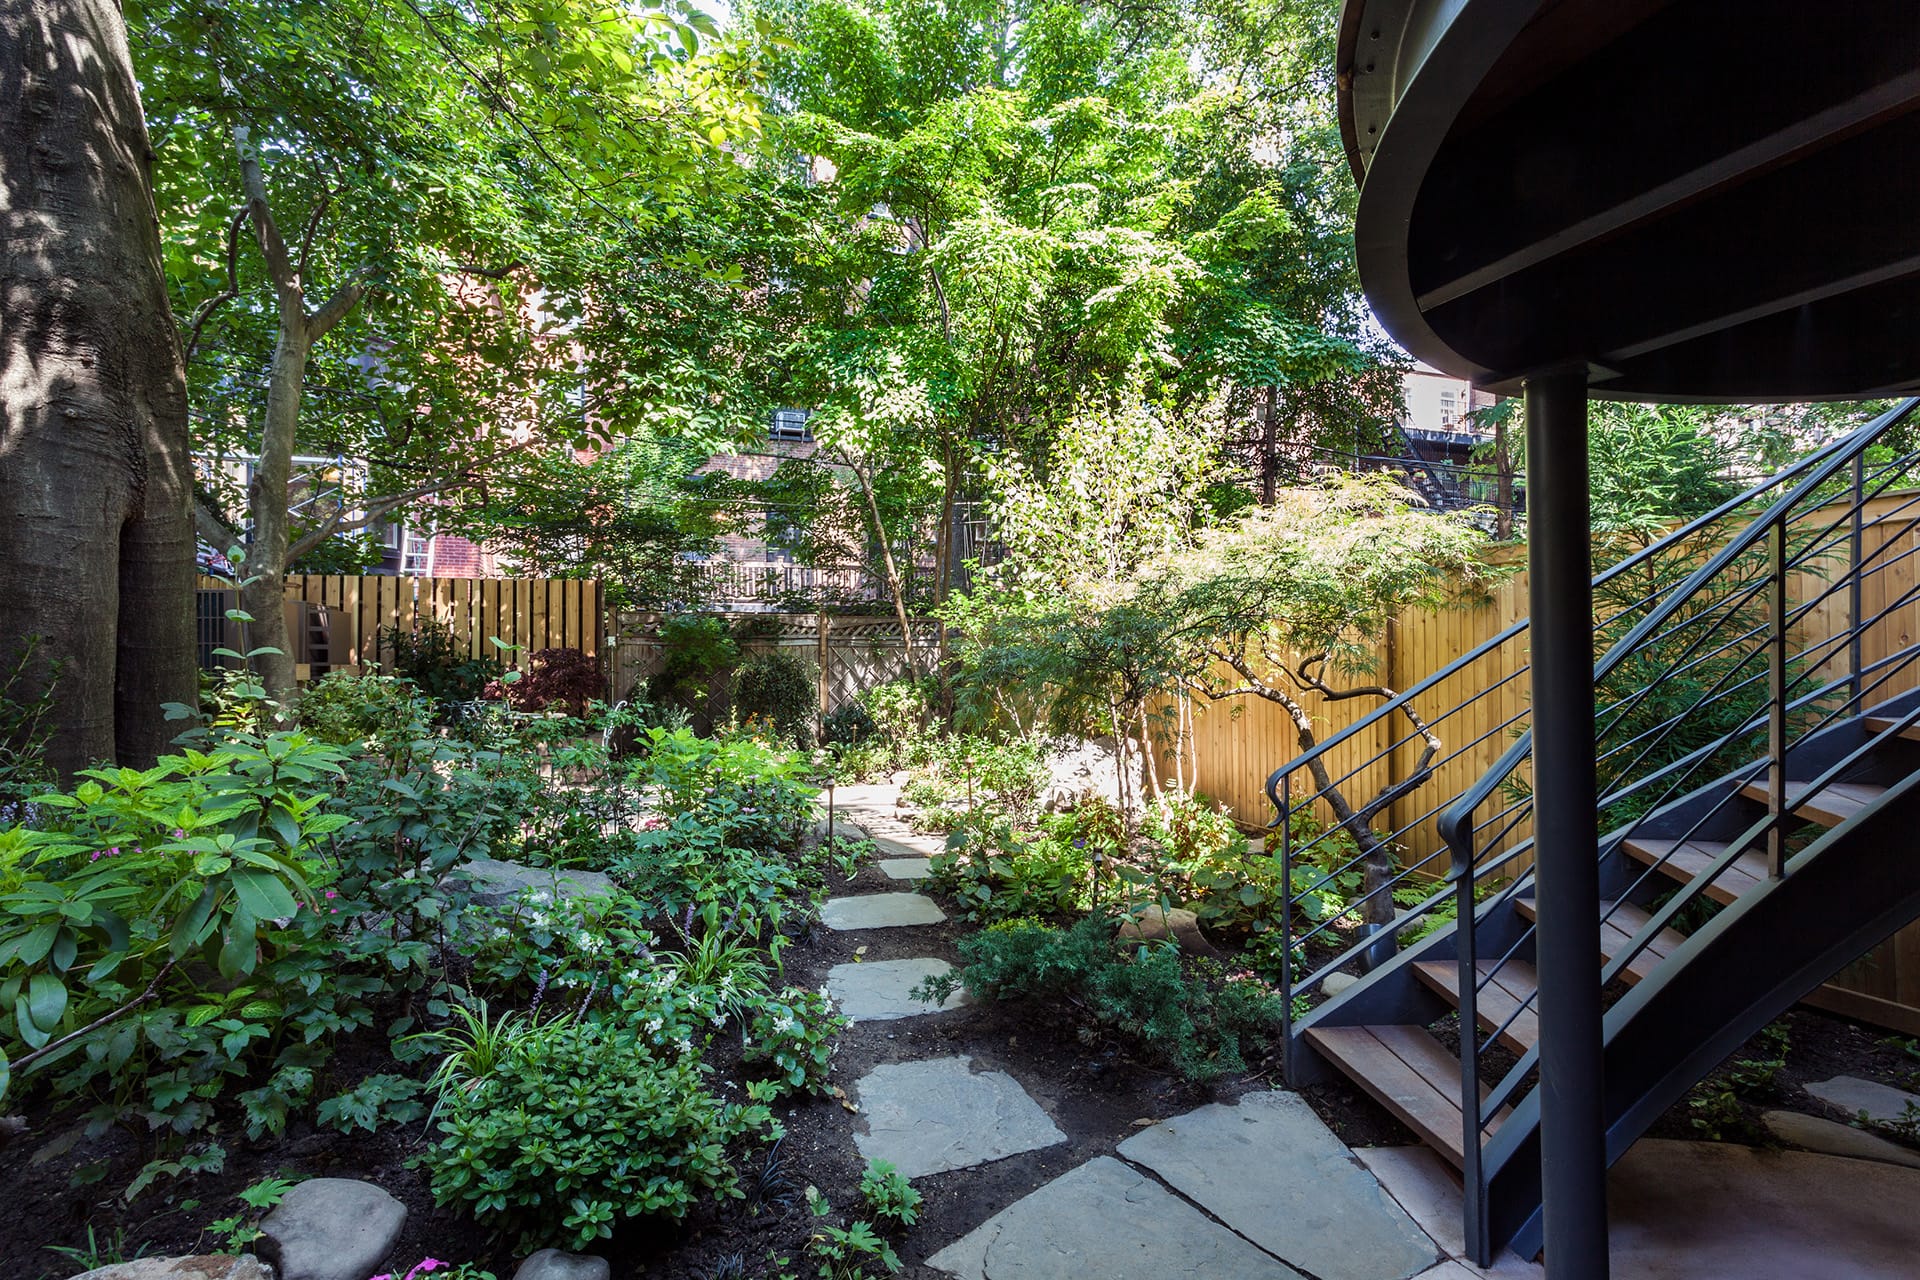 Rear garden of a Brooklyn Heights home with a staircase leading to the parlor-level deck